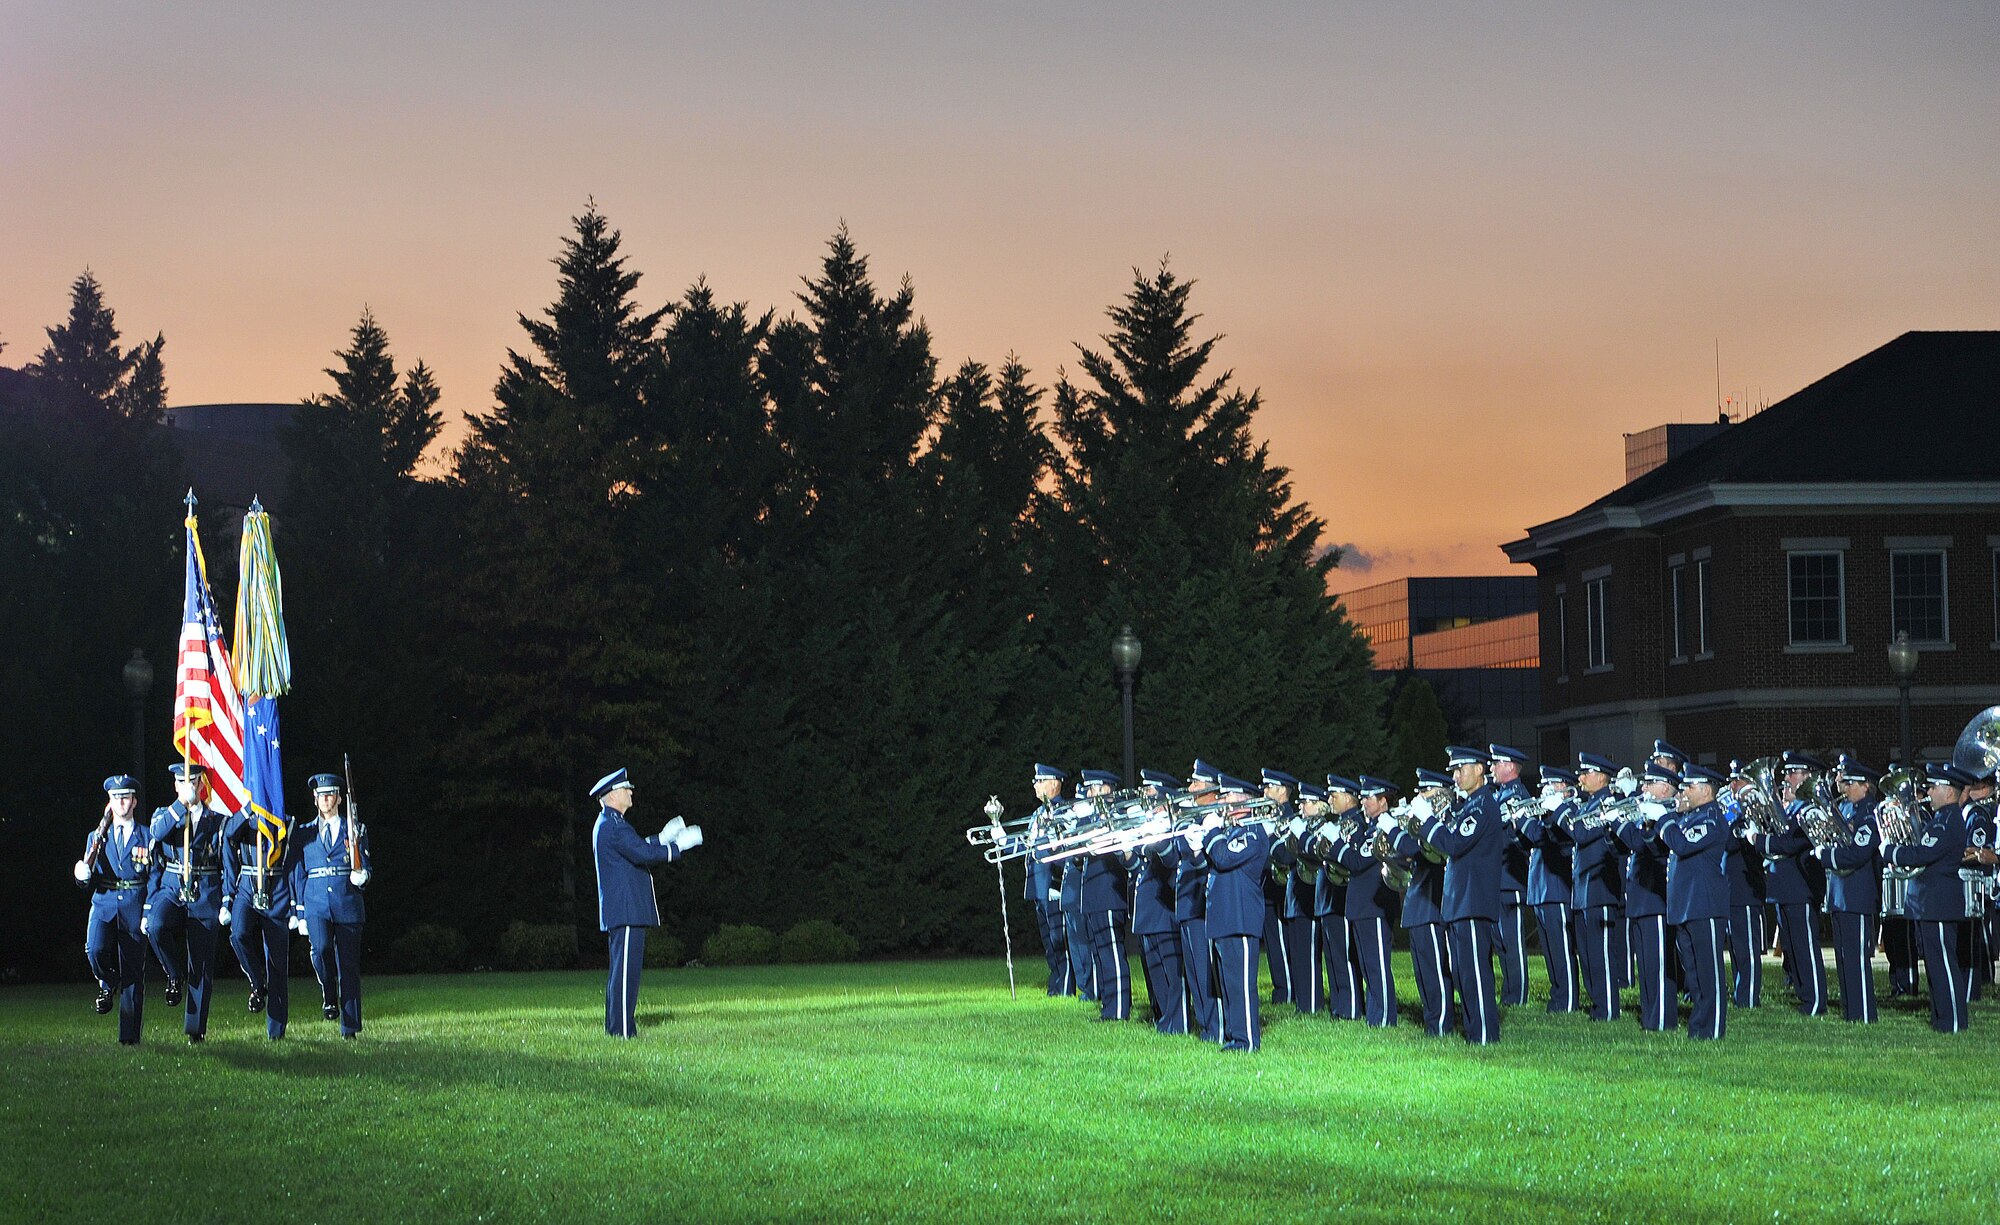 The United States Air Force Honor Guard Drill Team and Air Force Band present the colors during the United States Air Force Tattoo on Sept. 17, 2015. The Air Force District of Washington commemorated the United States Air Force's 68th birthday September 17, 2015 with a celebration of music, drill and ceremony, aircraft, and fireworks on the Air Force Ceremonial Lawn at Joint Base Anacostia-Bolling. The event included flyovers of several aircraft that included the Air Force Thunderbirds and a Warbird vintage aircraft squadron, as well as performances by the Air Force Band and Honor Guard. (U.S. Air Force photo/Jim Lotz)